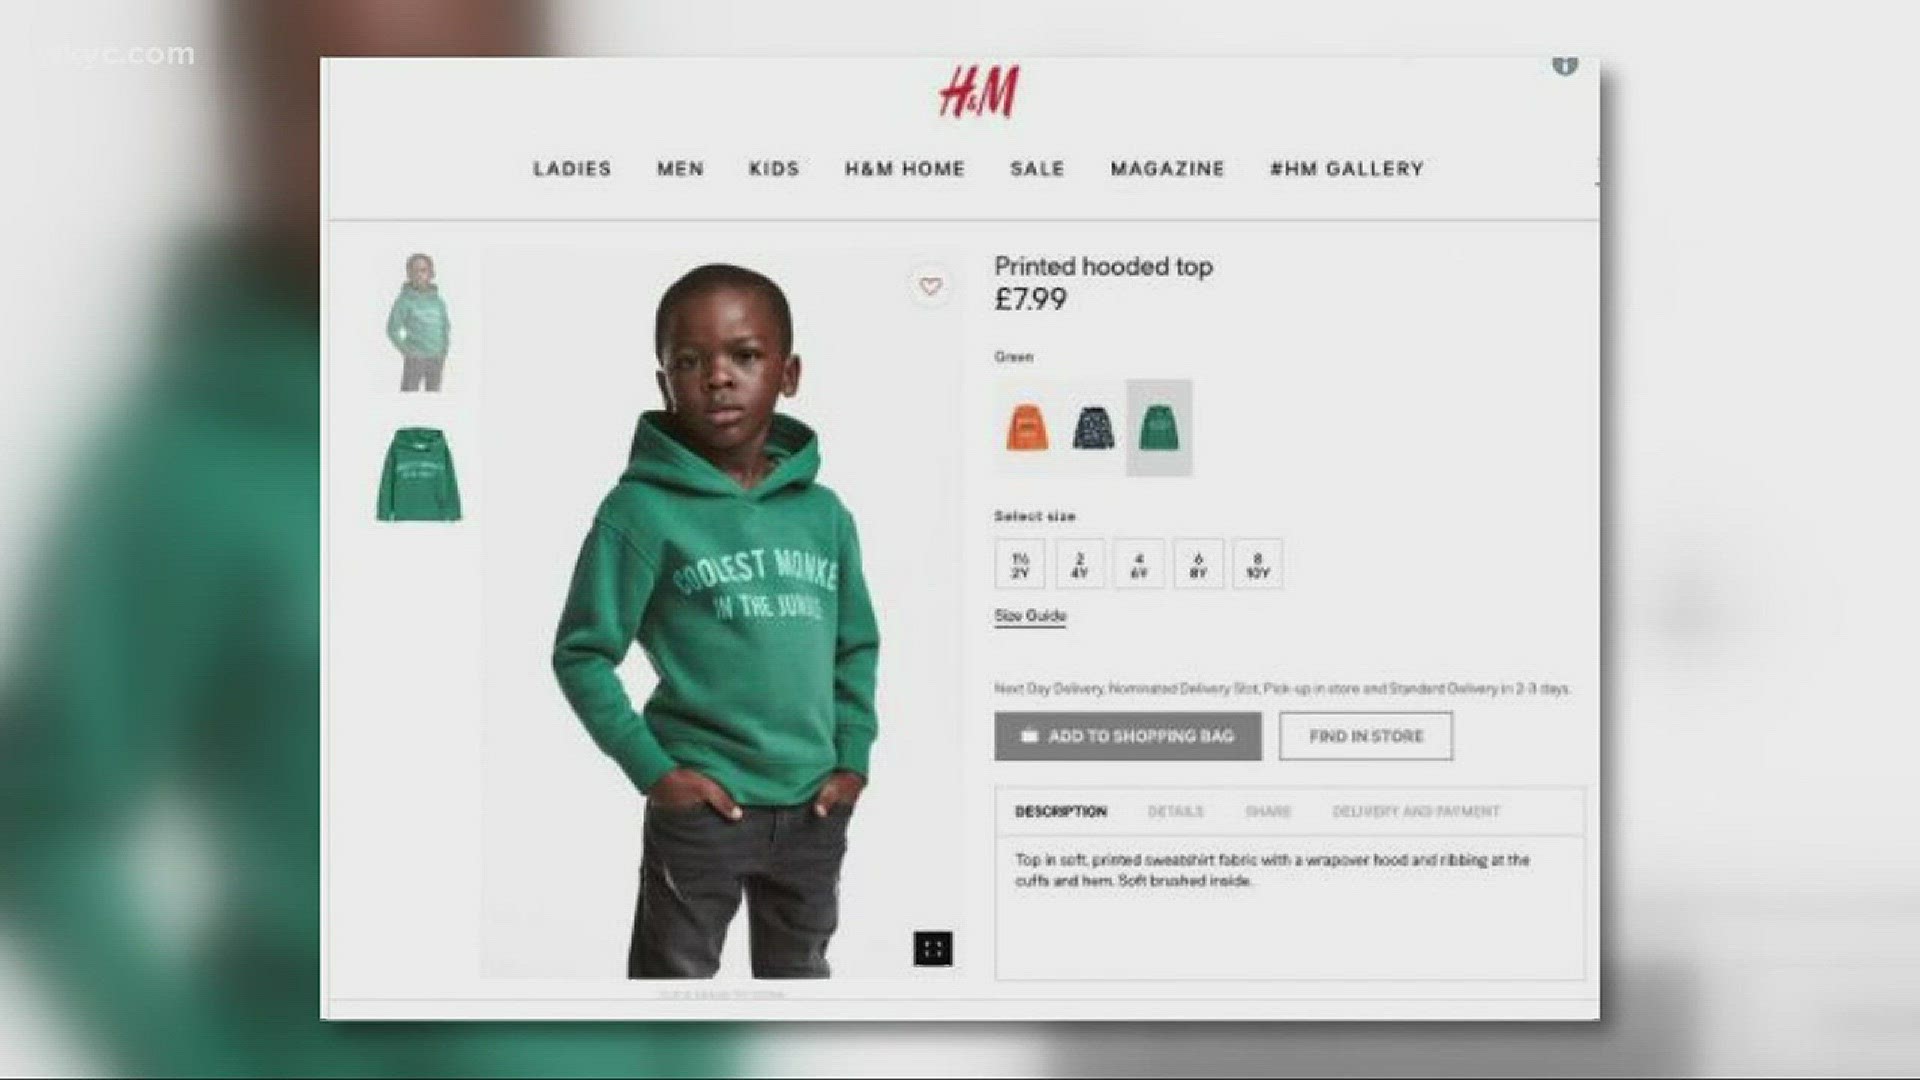 Jan. 9, 2018: Cleveland Cavaliers star LeBron James hit social media with a response to H&M's controversial 'coolest monkey' sweatshirt.